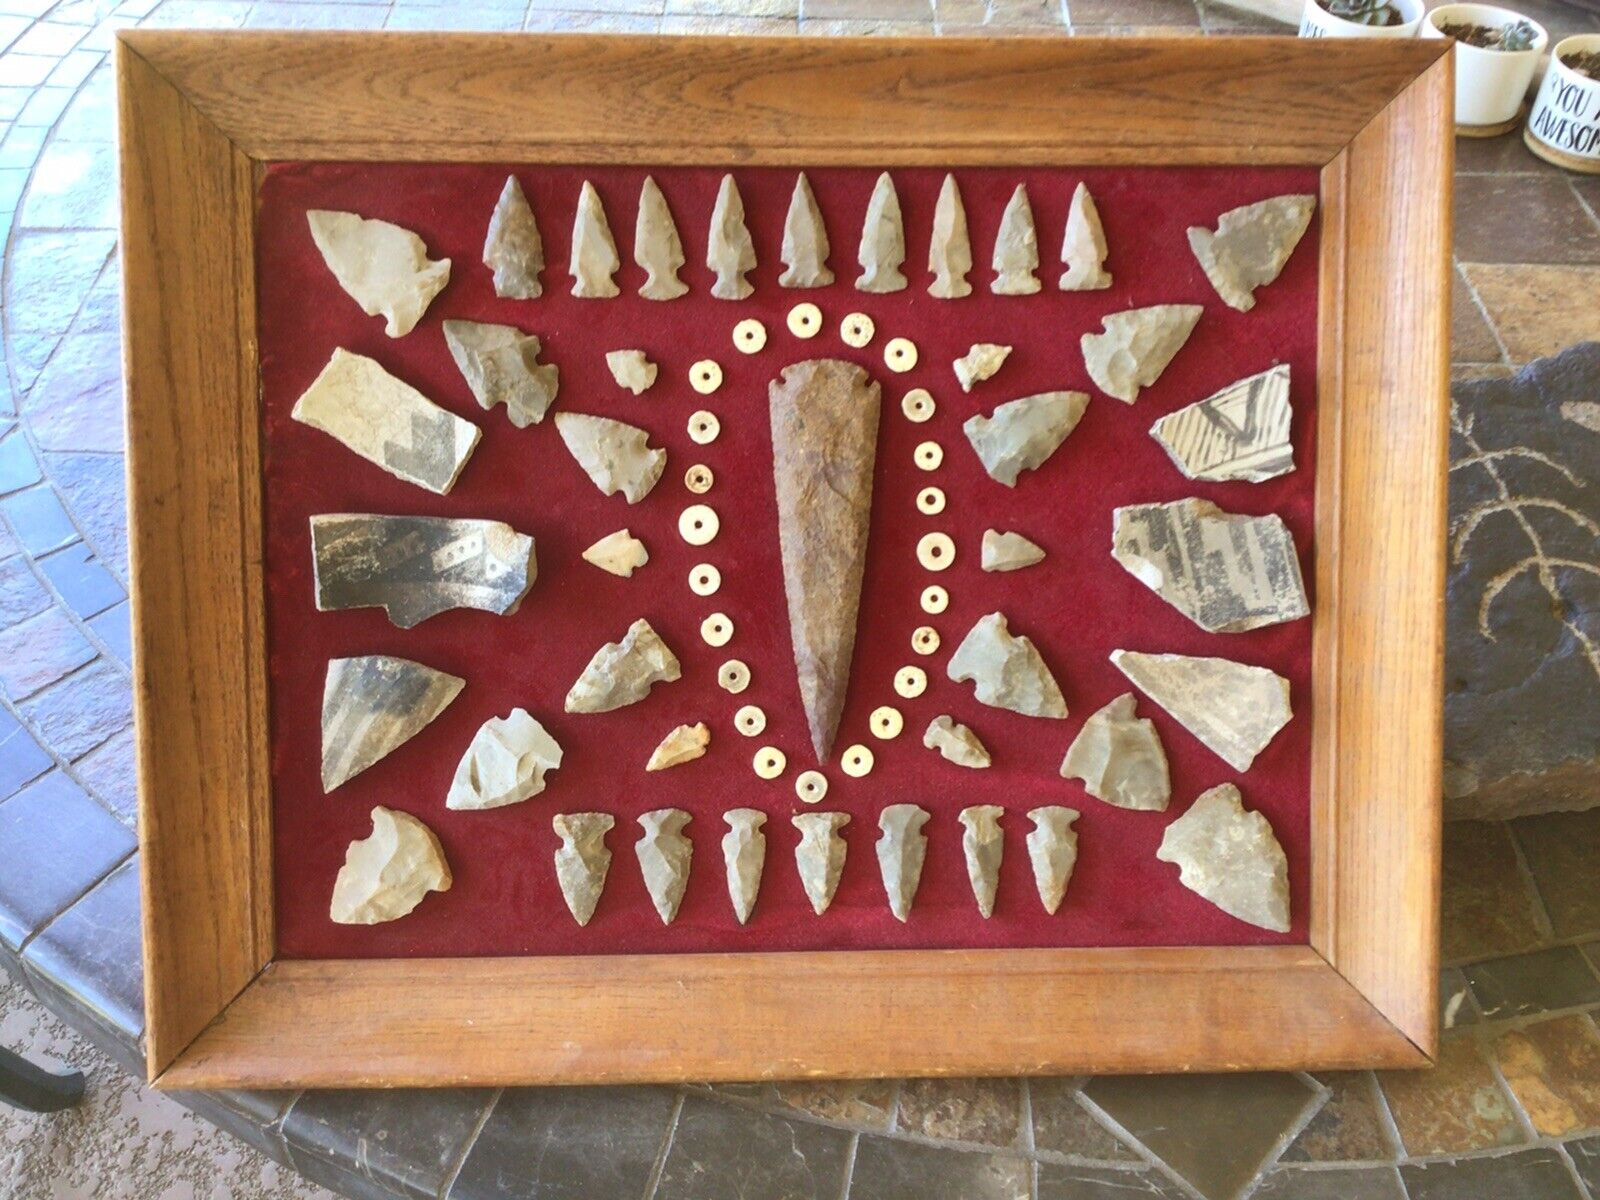 Vintage Native American 19”x15” framed display arrowheads pottery shards & beads